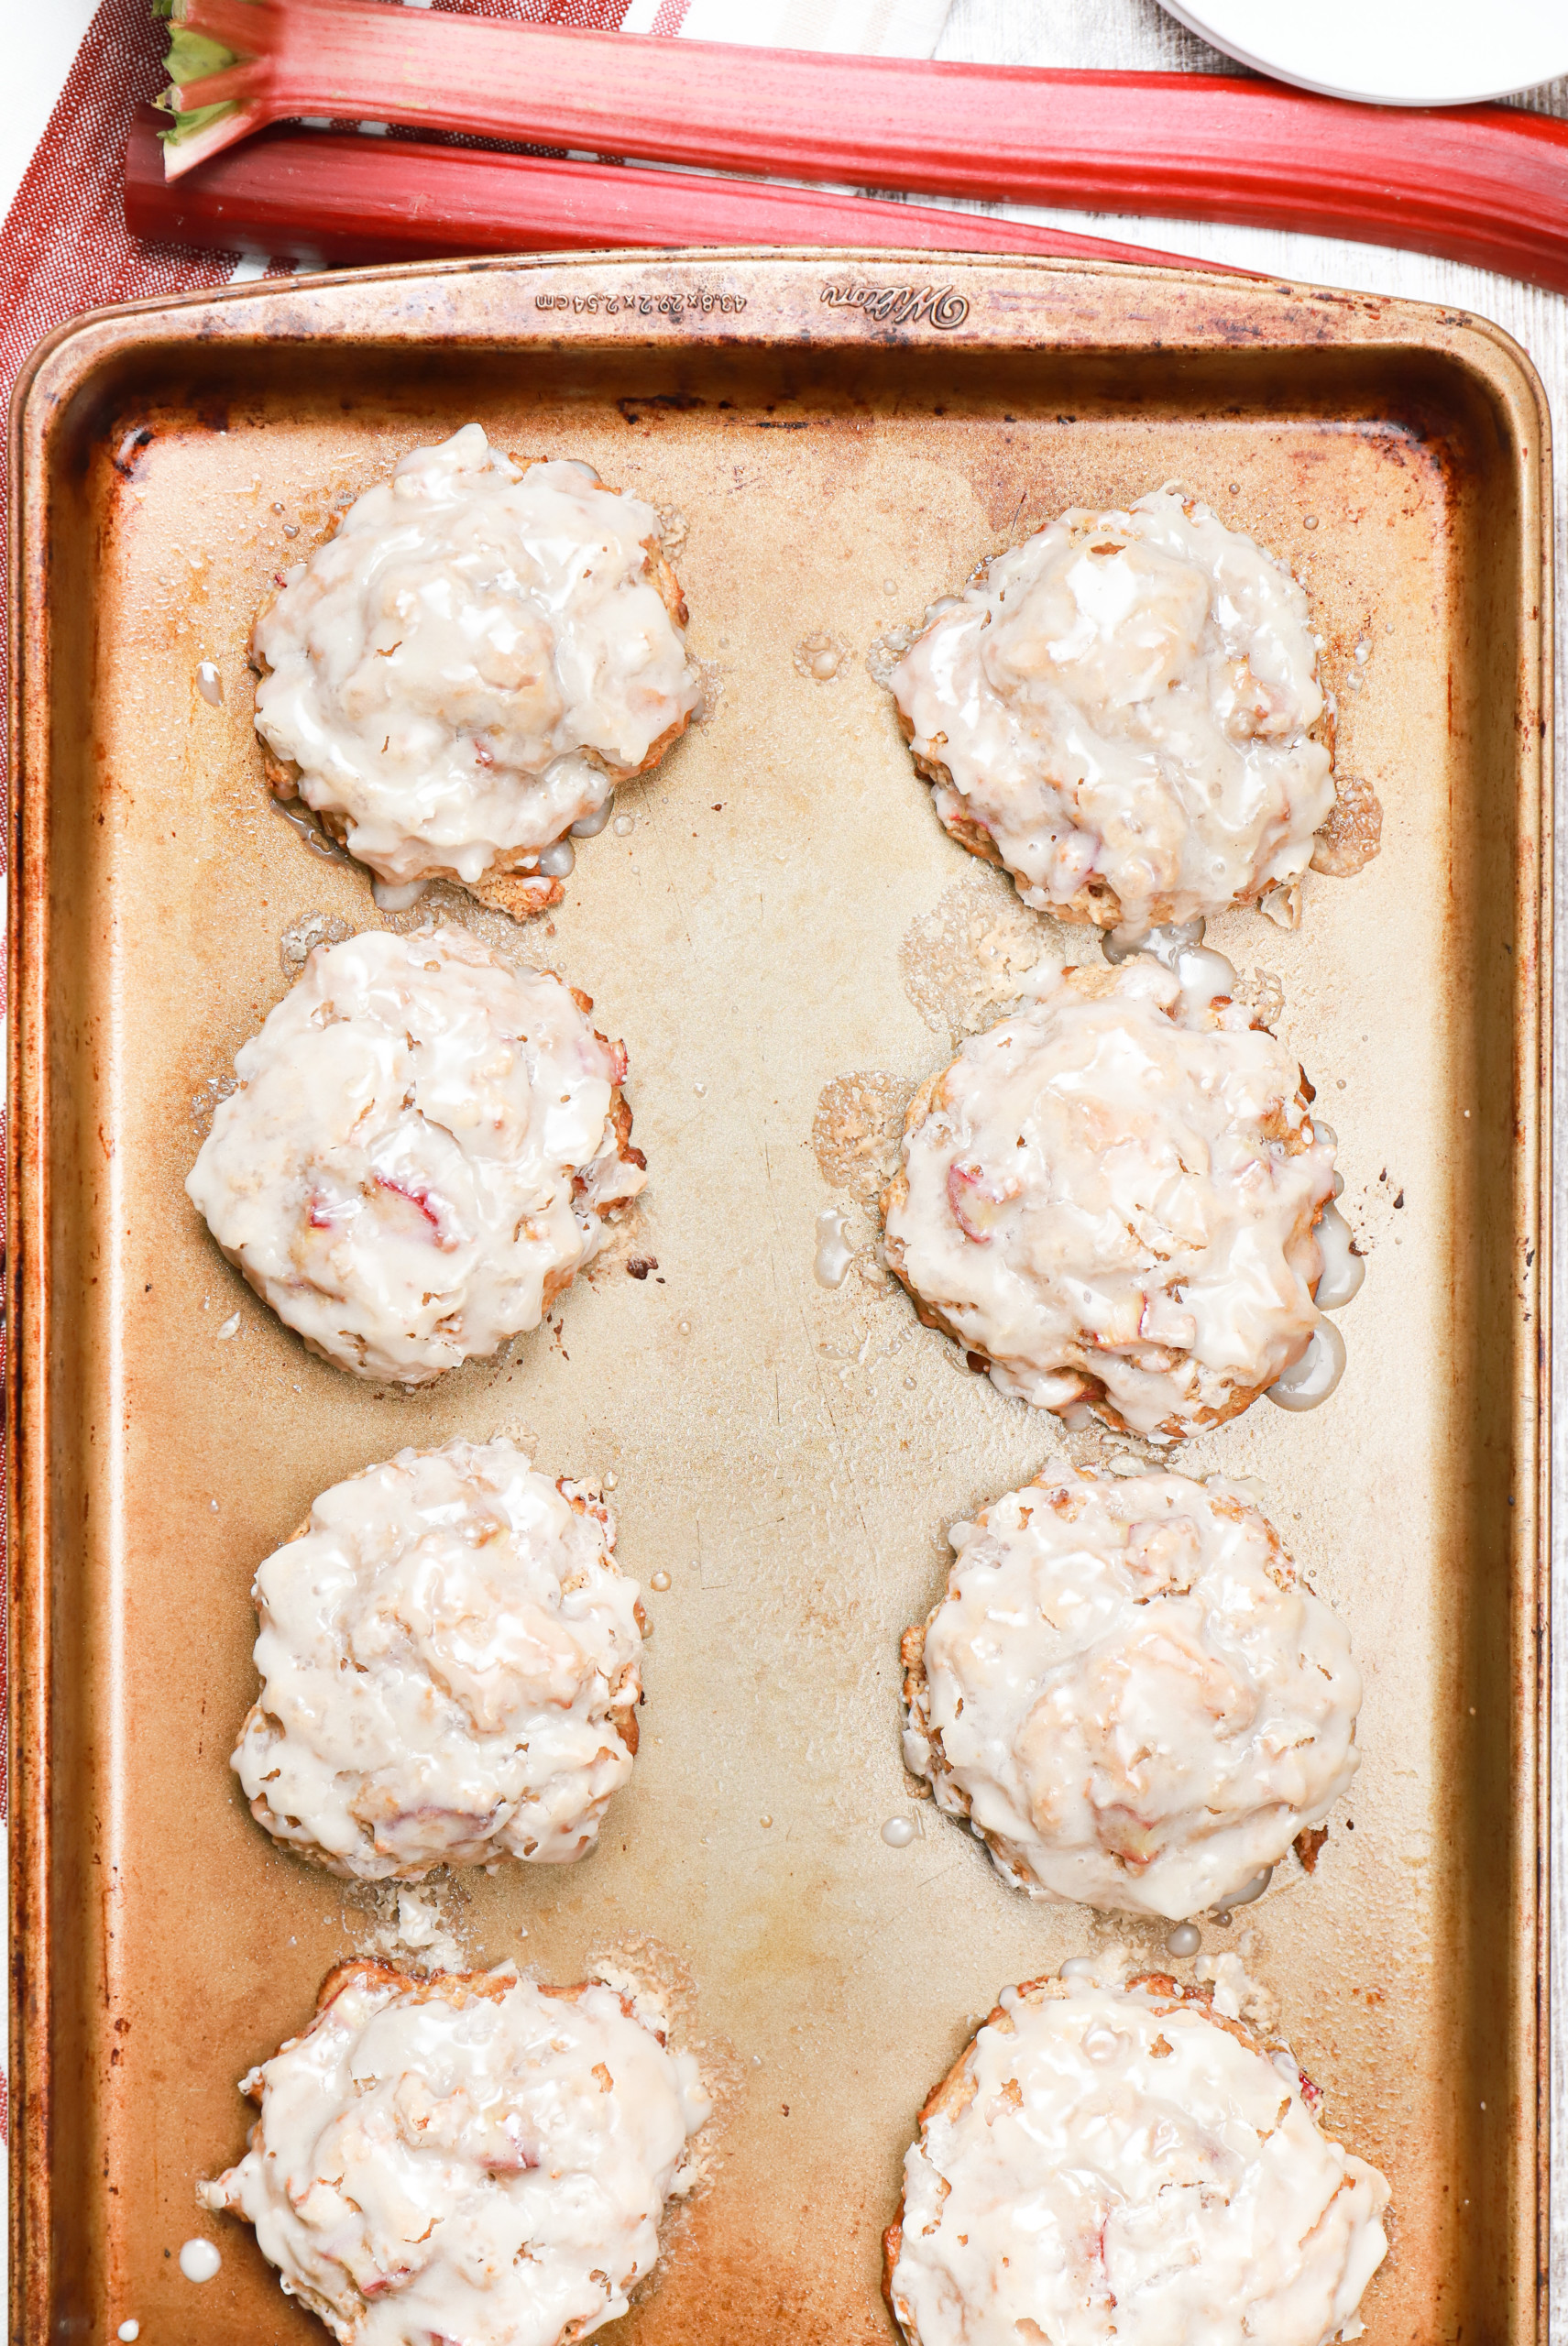 Overhead view of a batch of baked rhubarb fritters on an aluminum baking sheet.